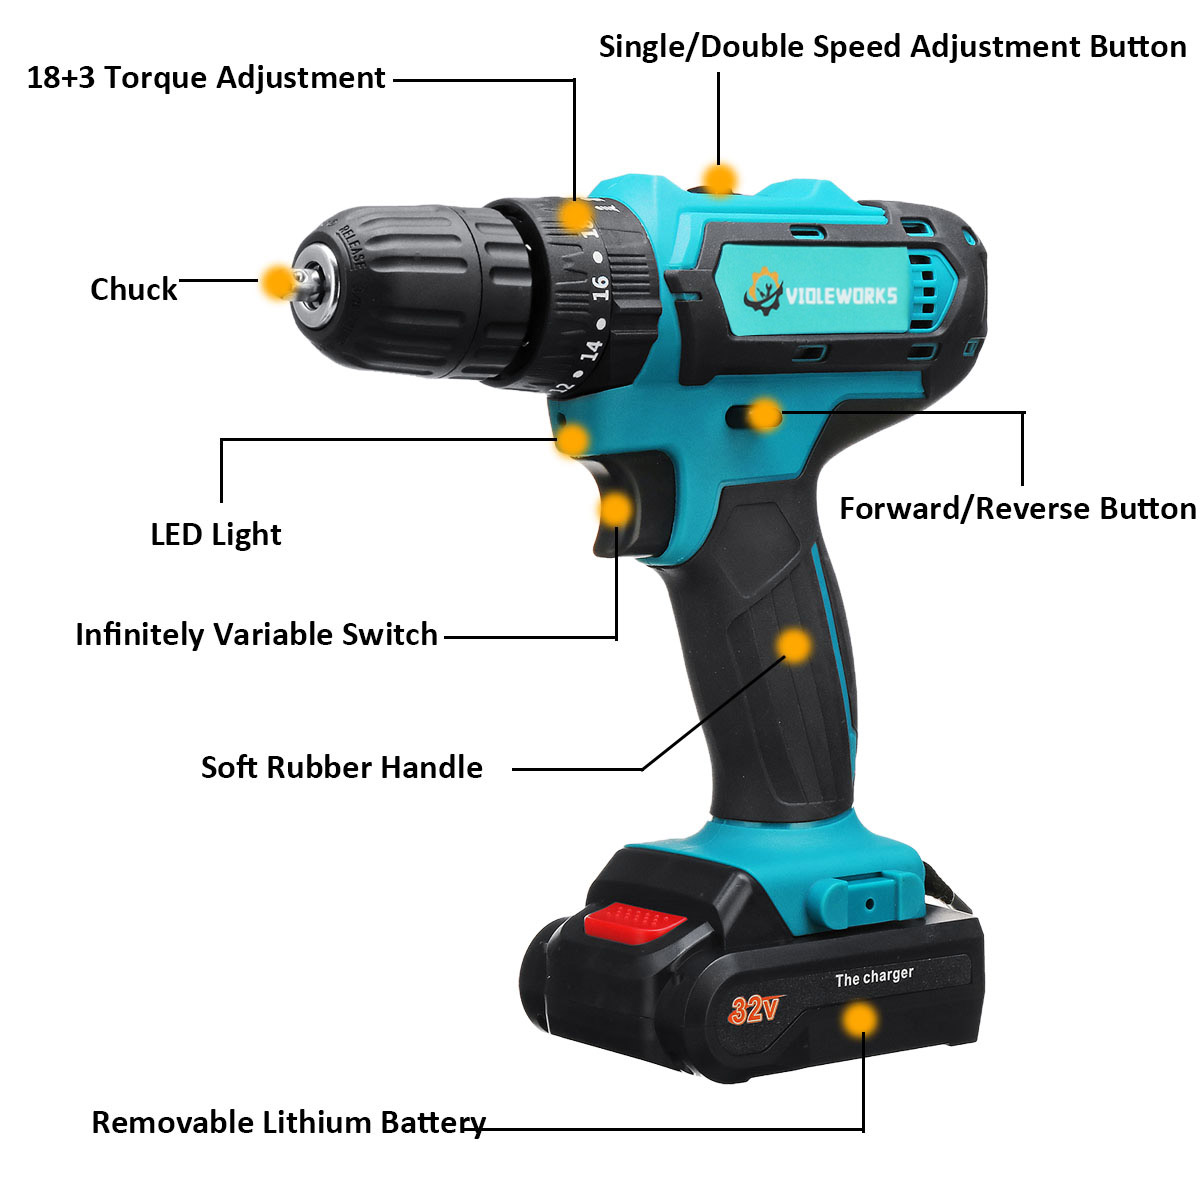 2-Speed-Power-Drills-6000mah-Cordless-Drill-3-IN-1-Electric-Screwdriver-Hammer-Drill-with-2pcs-Batte-1416071-4